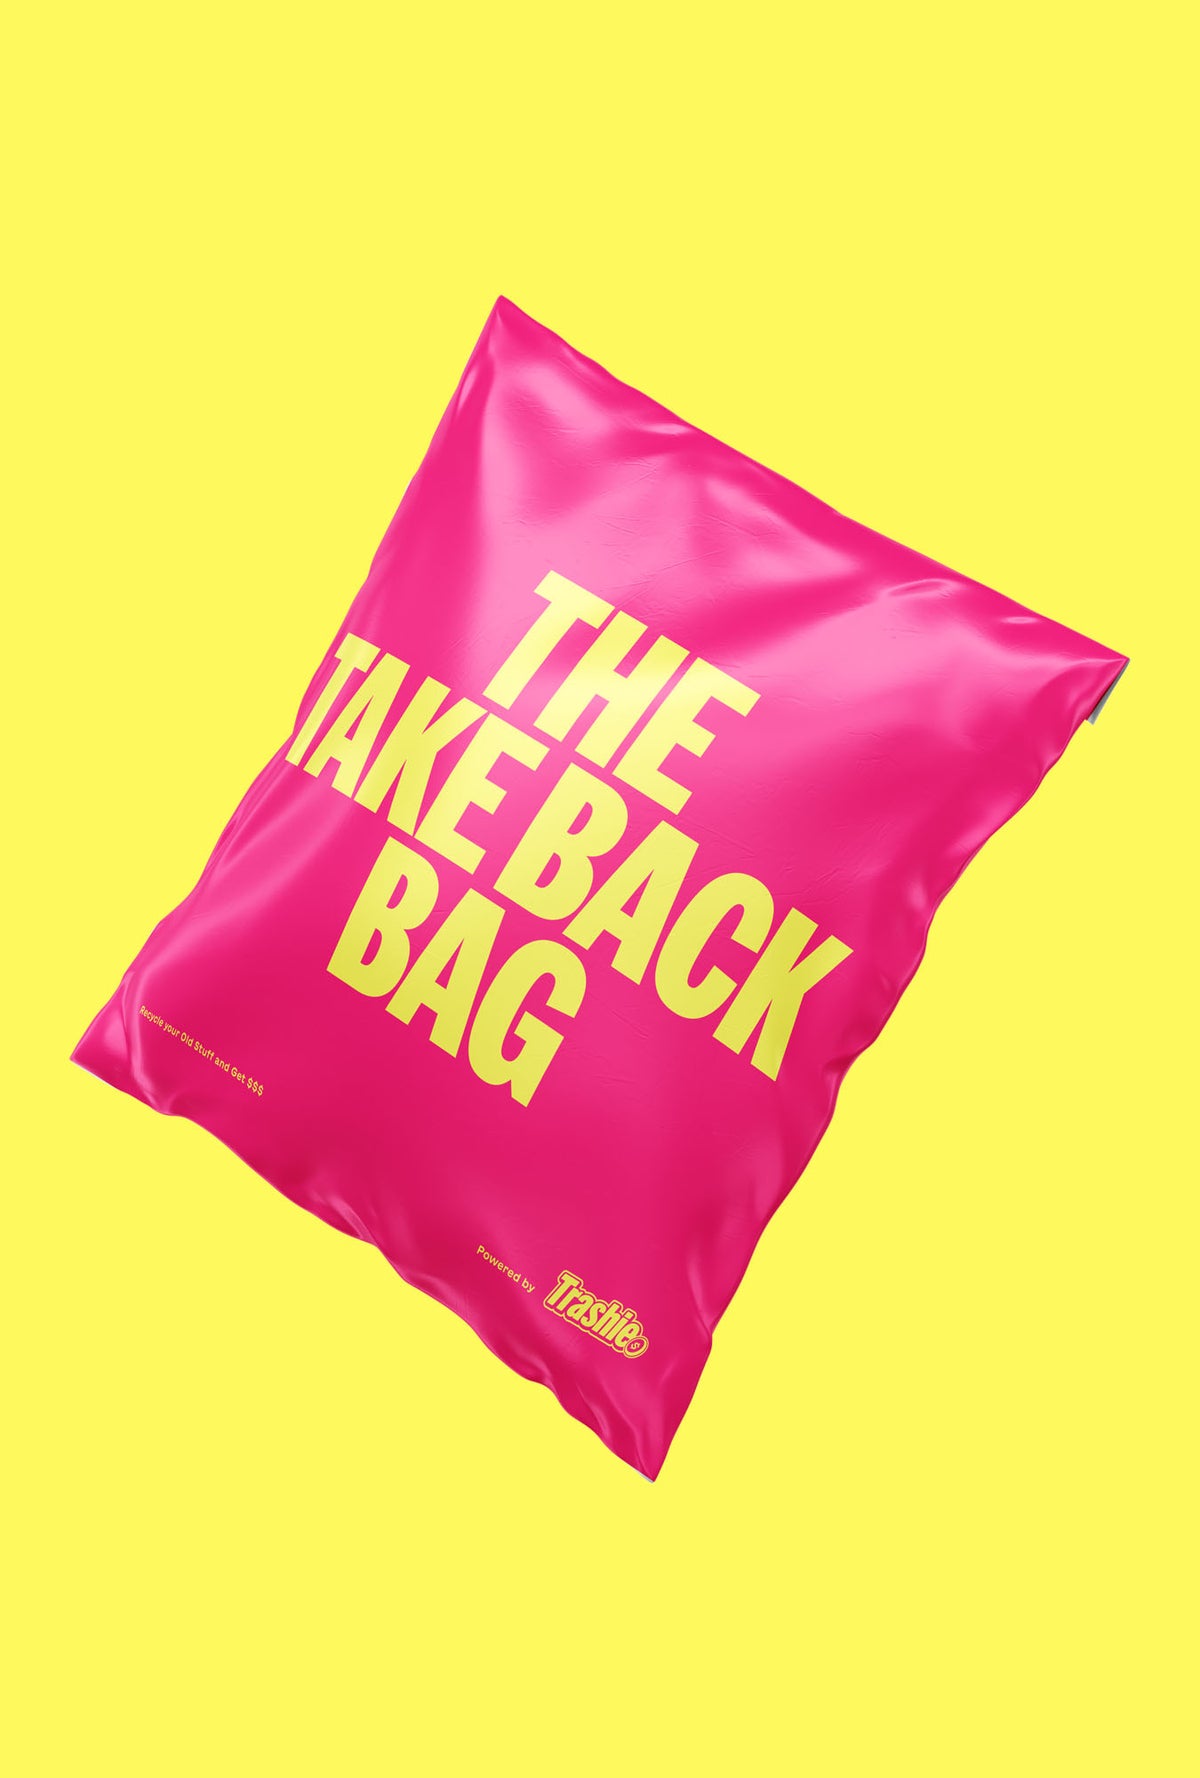 Take Back Bag: $30 Credit For Recycling